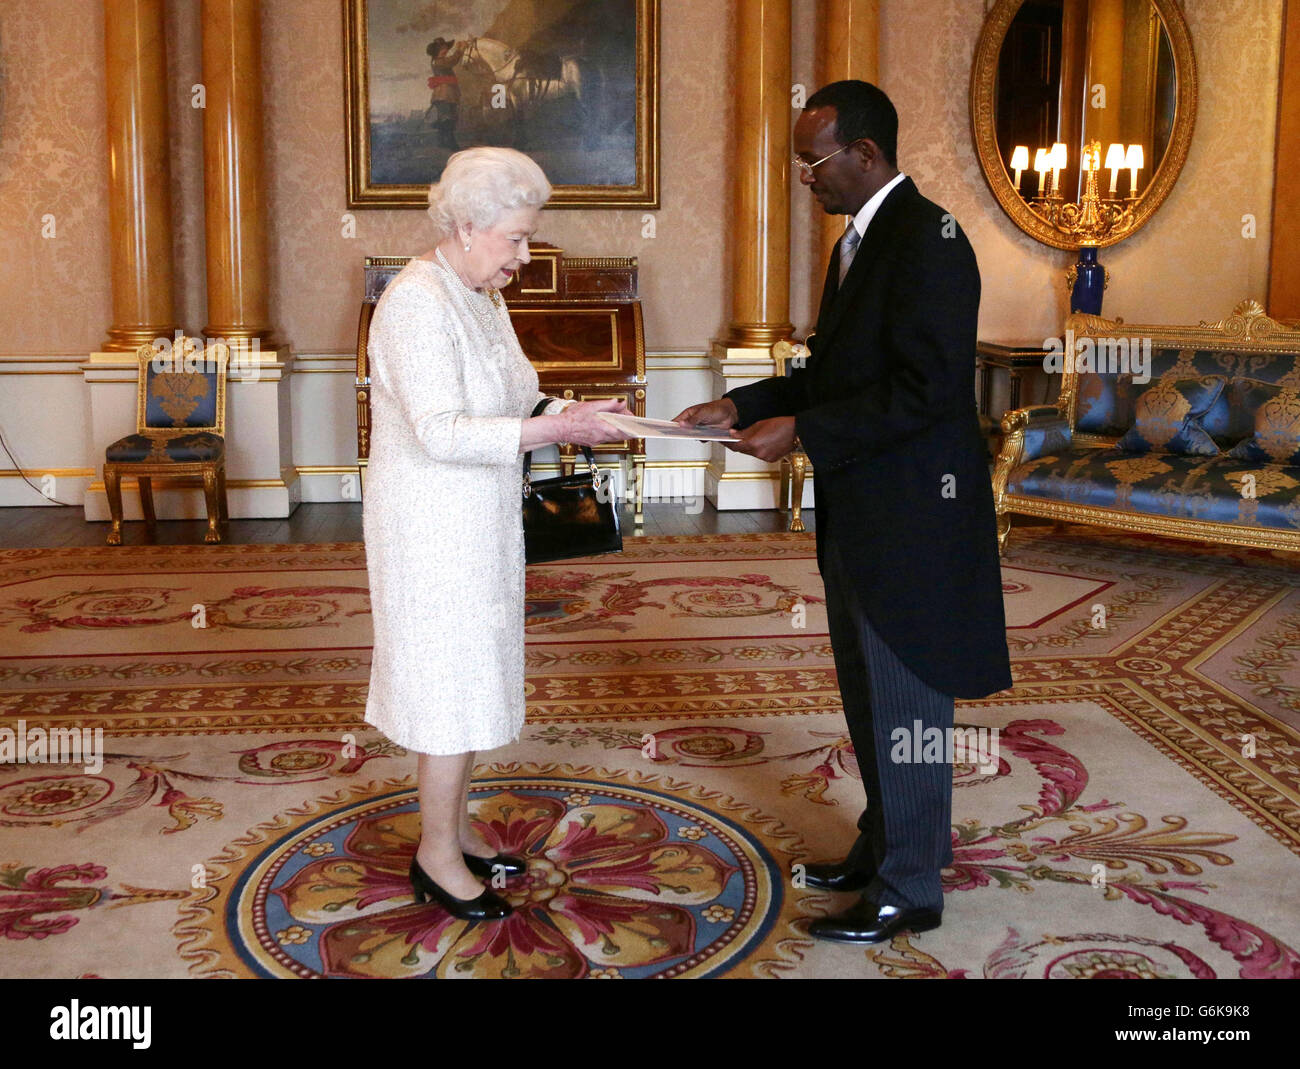 His Excellency Mr Abdullahi Mohamed Ali of Somalia during an audience with Queen Elizabeth II, where he presented his Letters of Credence as Ambassador, at Buckingham Palace, central London. Stock Photo